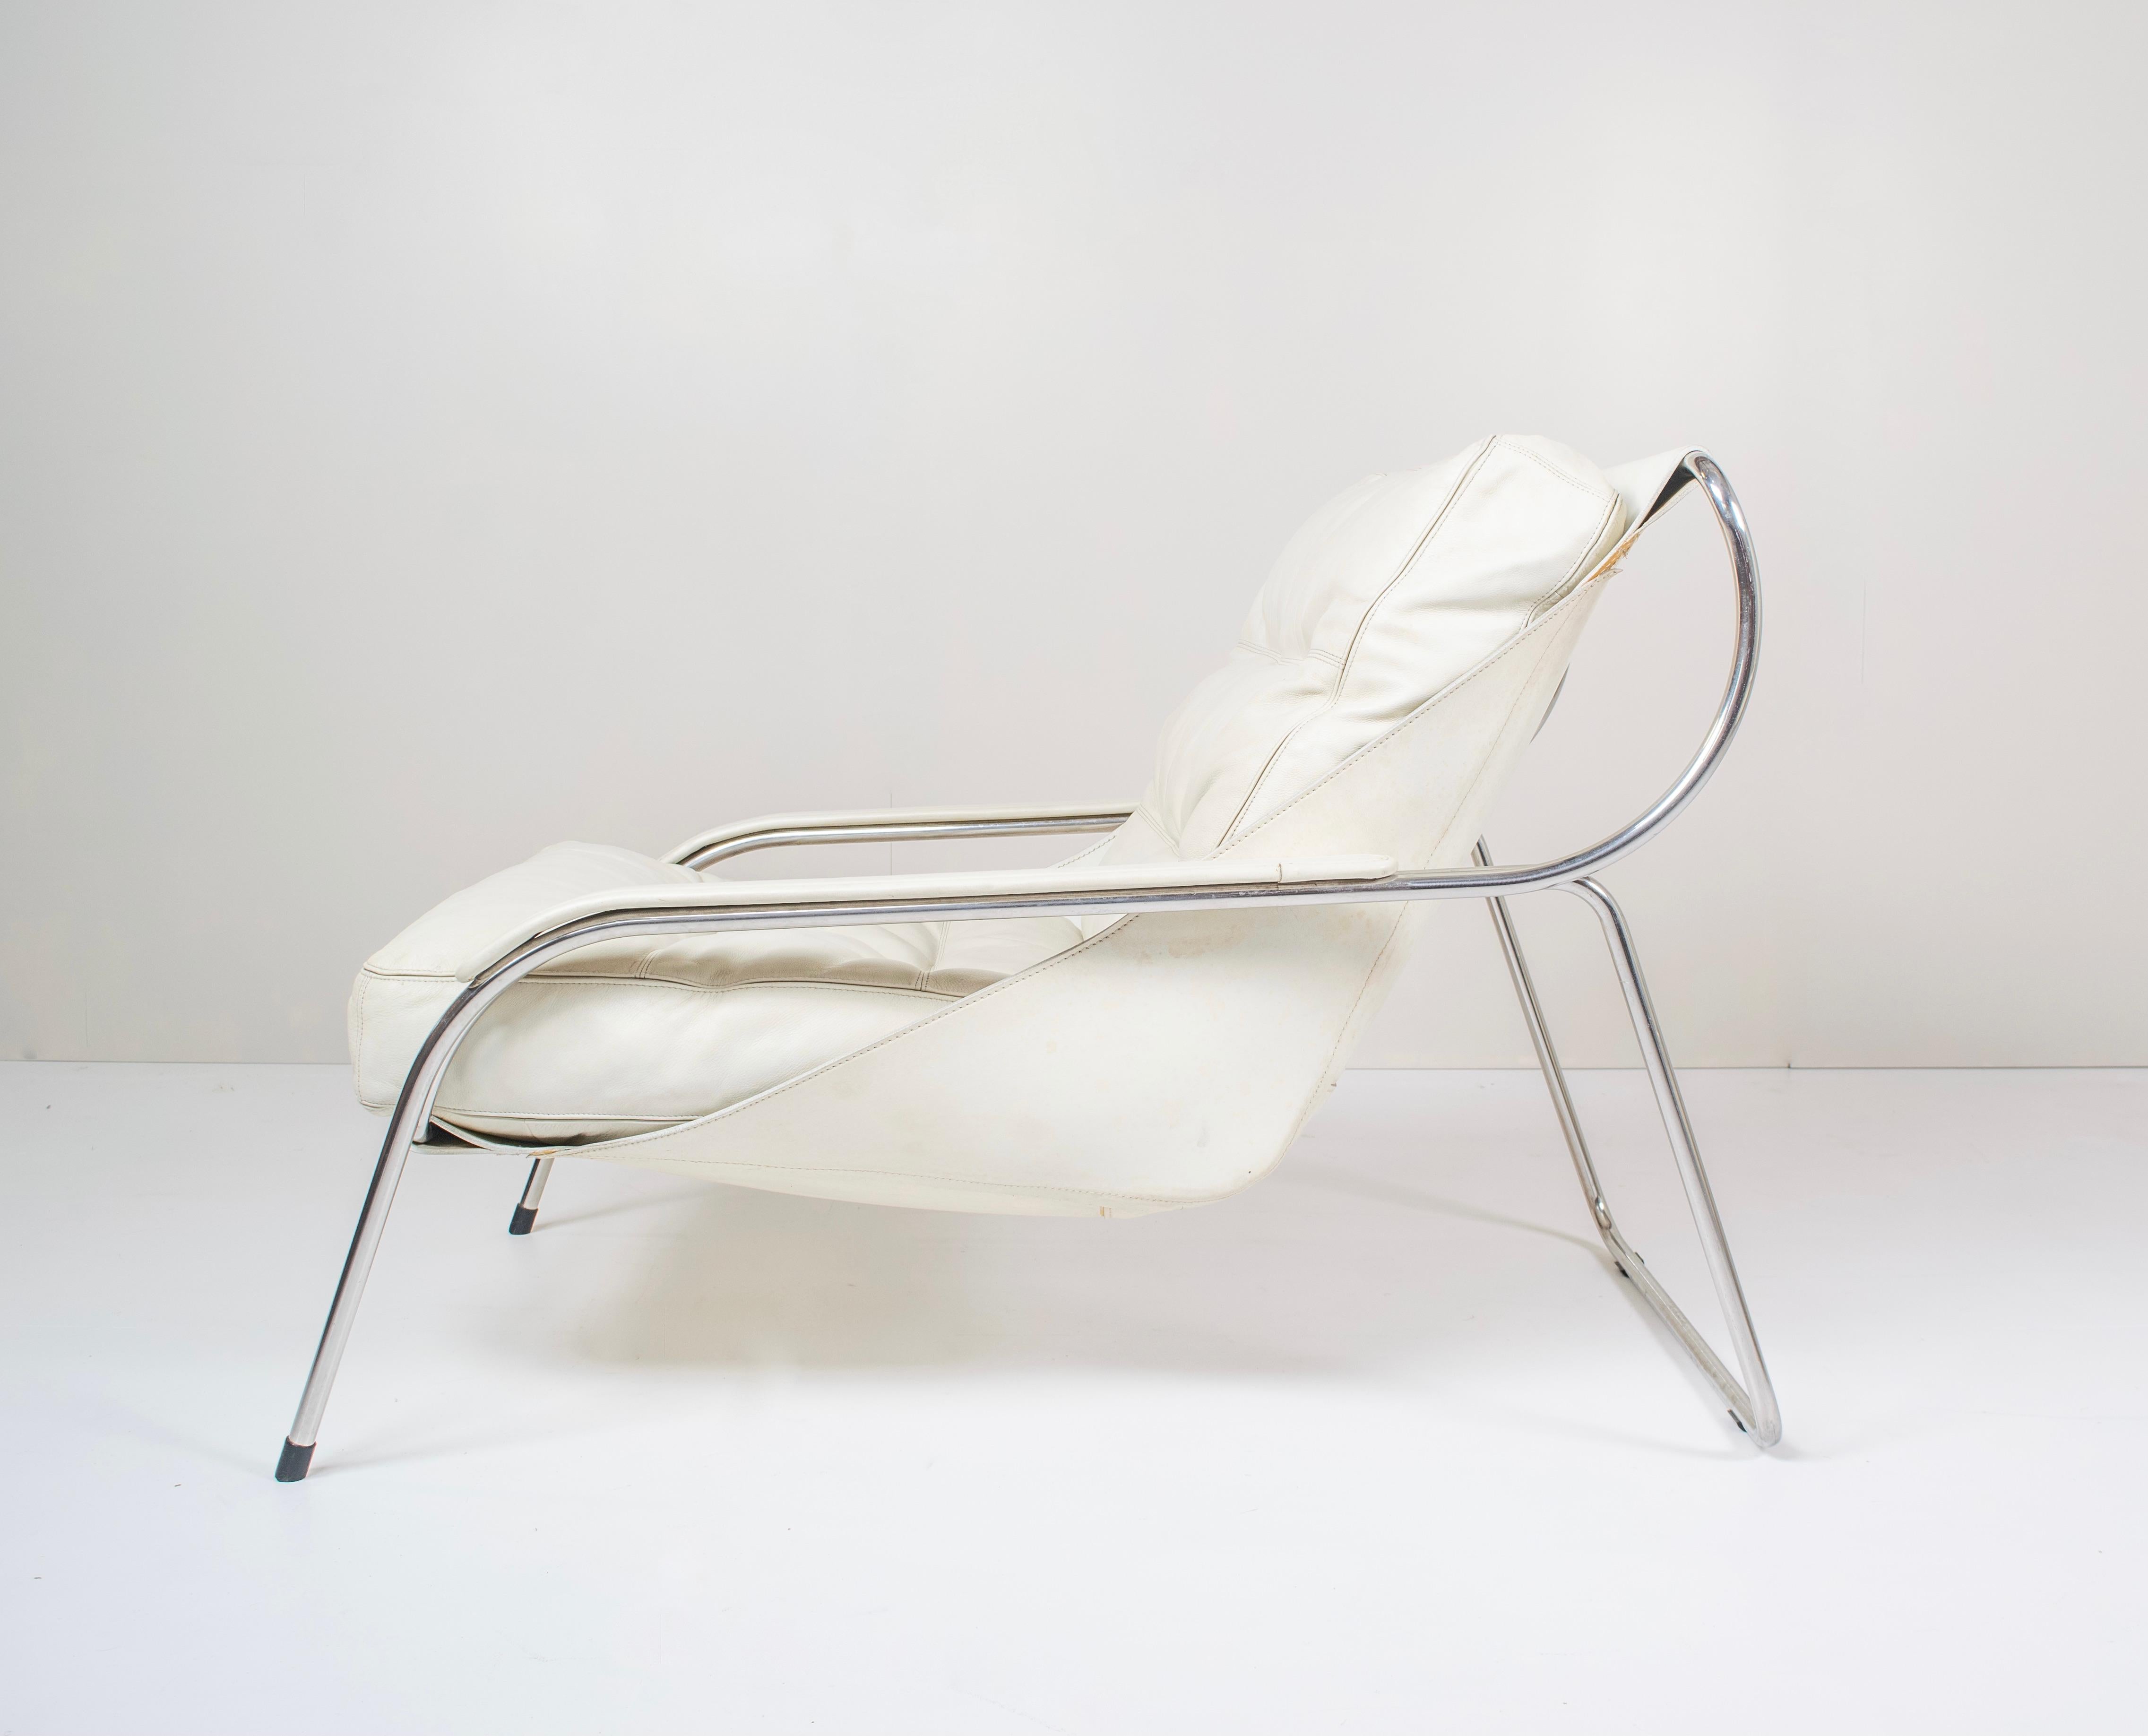 Pair of Marco Zanuso Maggiolina White Leather Chairs by Zanotta, Italy, 1947 1